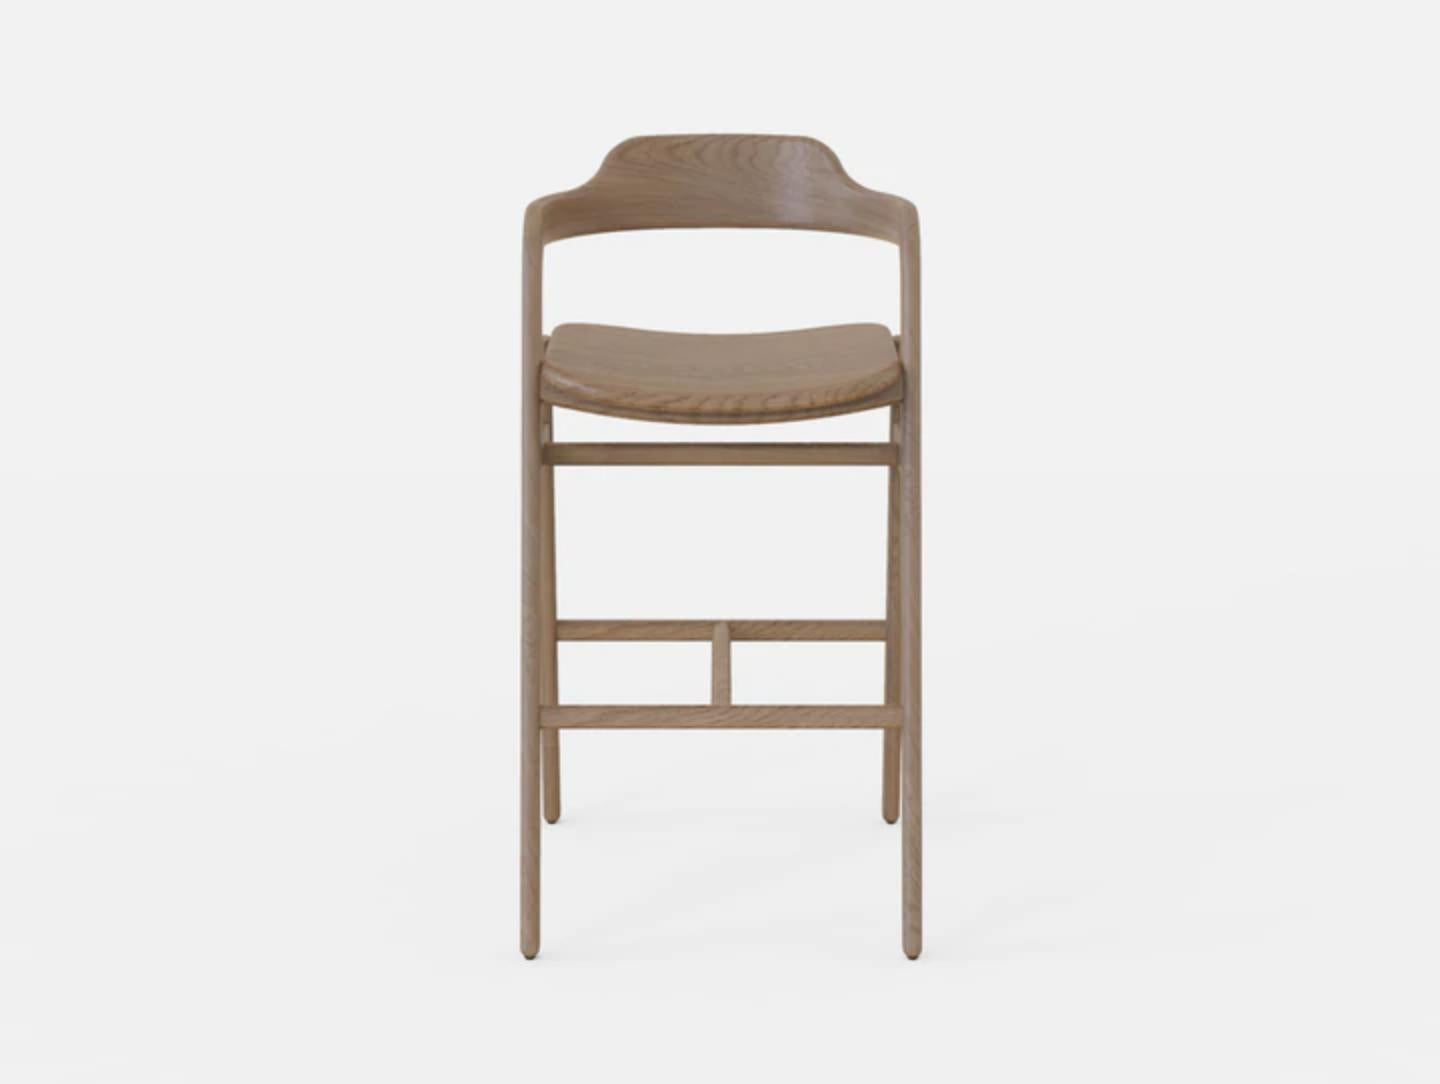 Balance high chair by Sebastián Angeles
Material: Walnut
Dimensions: W 45 x D 40 x 100 cm
Also Available: Other colors available,

The love of processes, the properties of materials, details and concepts make Dorica Taller a study not only of